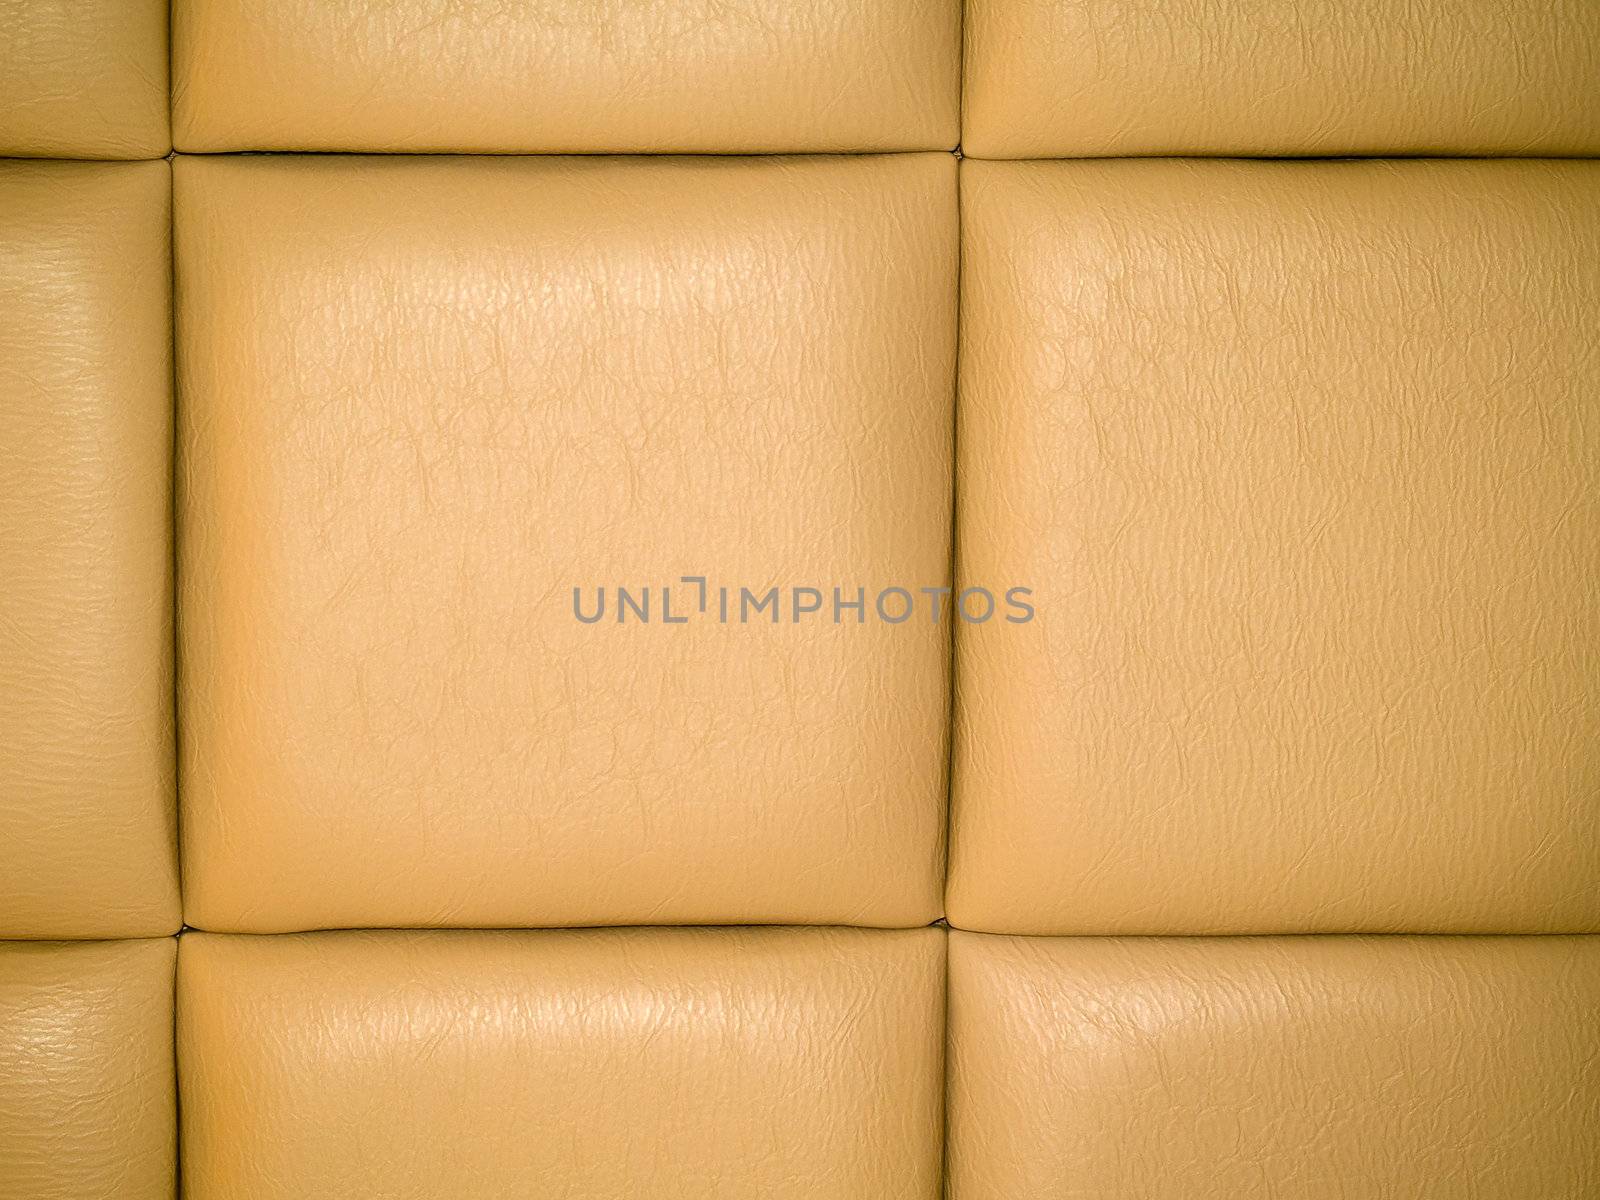 Tan Leather Upholstery Background with a Repetitive pattern